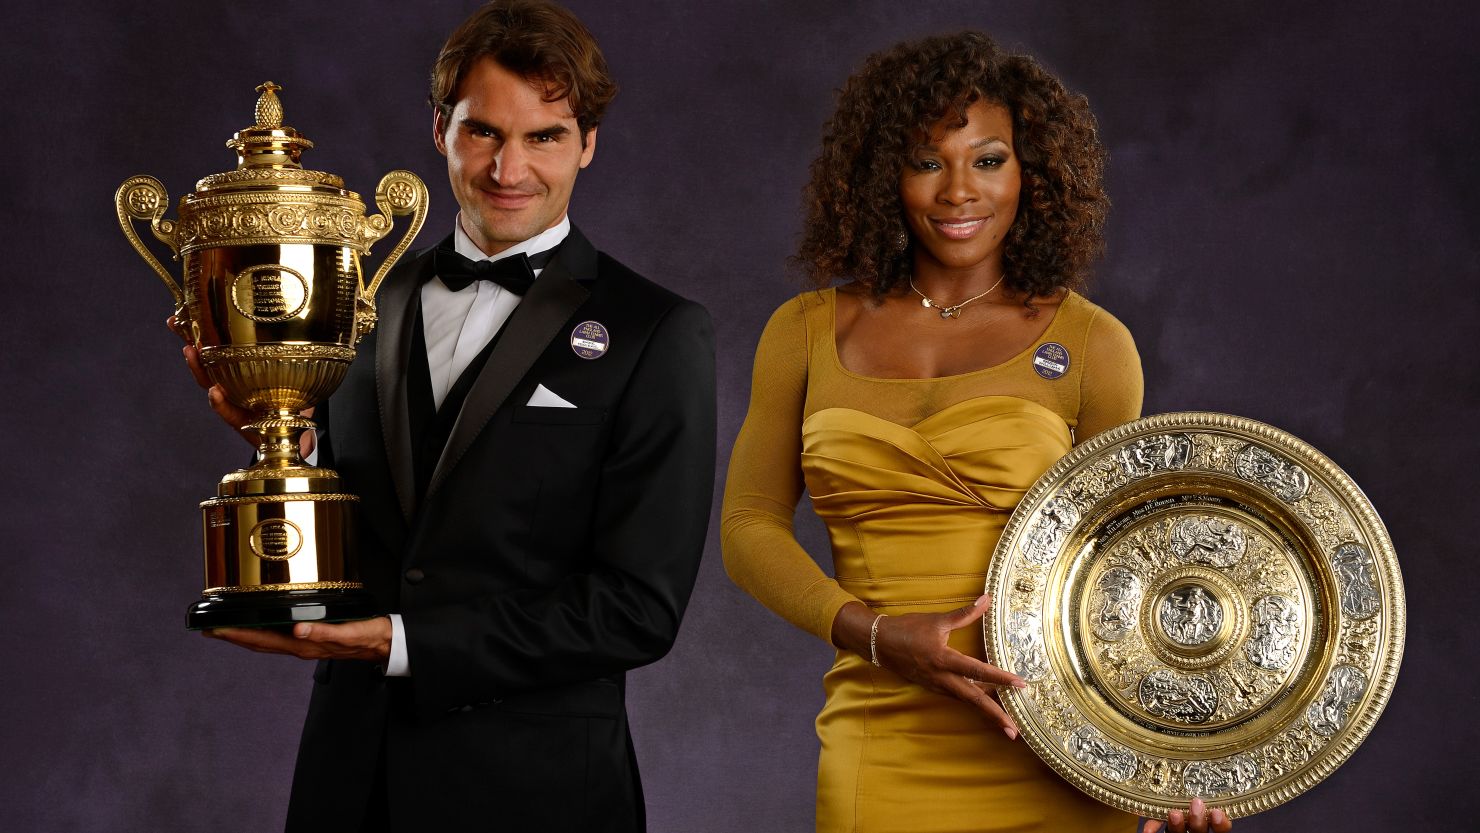 Roger Federer and Serena Williams have won 43 grand slam singles titles between them during their illustrious tennis careers.